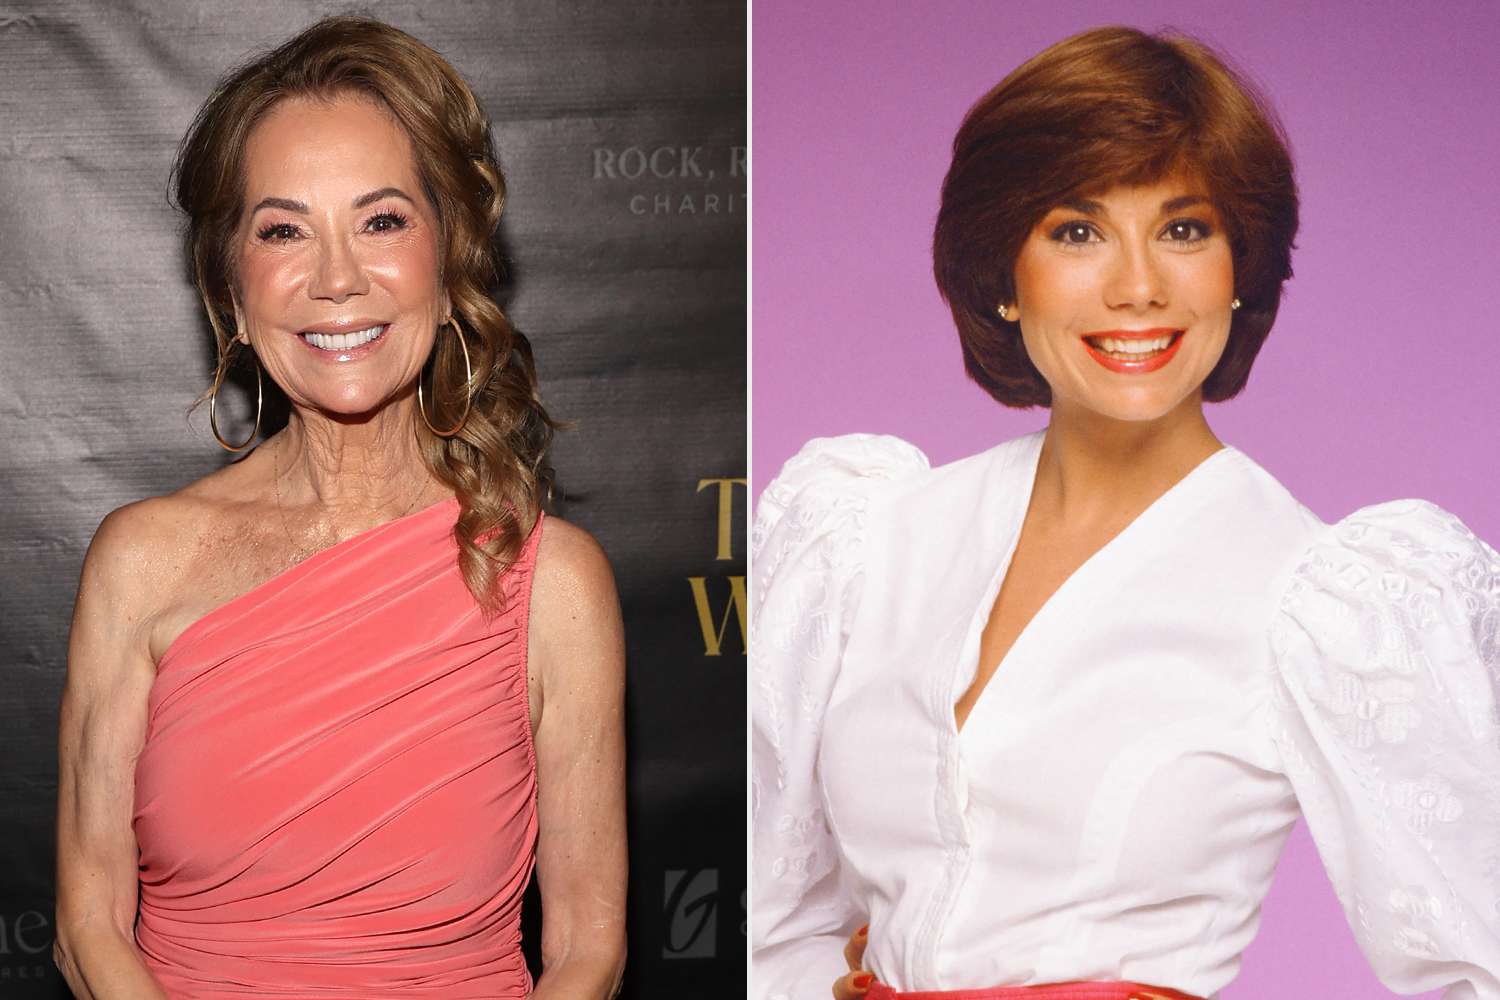 Kathie Lee Gifford Recalls 'Cruel' Casting Agent Telling Her She Wasn't Pretty Enough For “Charlie's Angels ”TV Series...